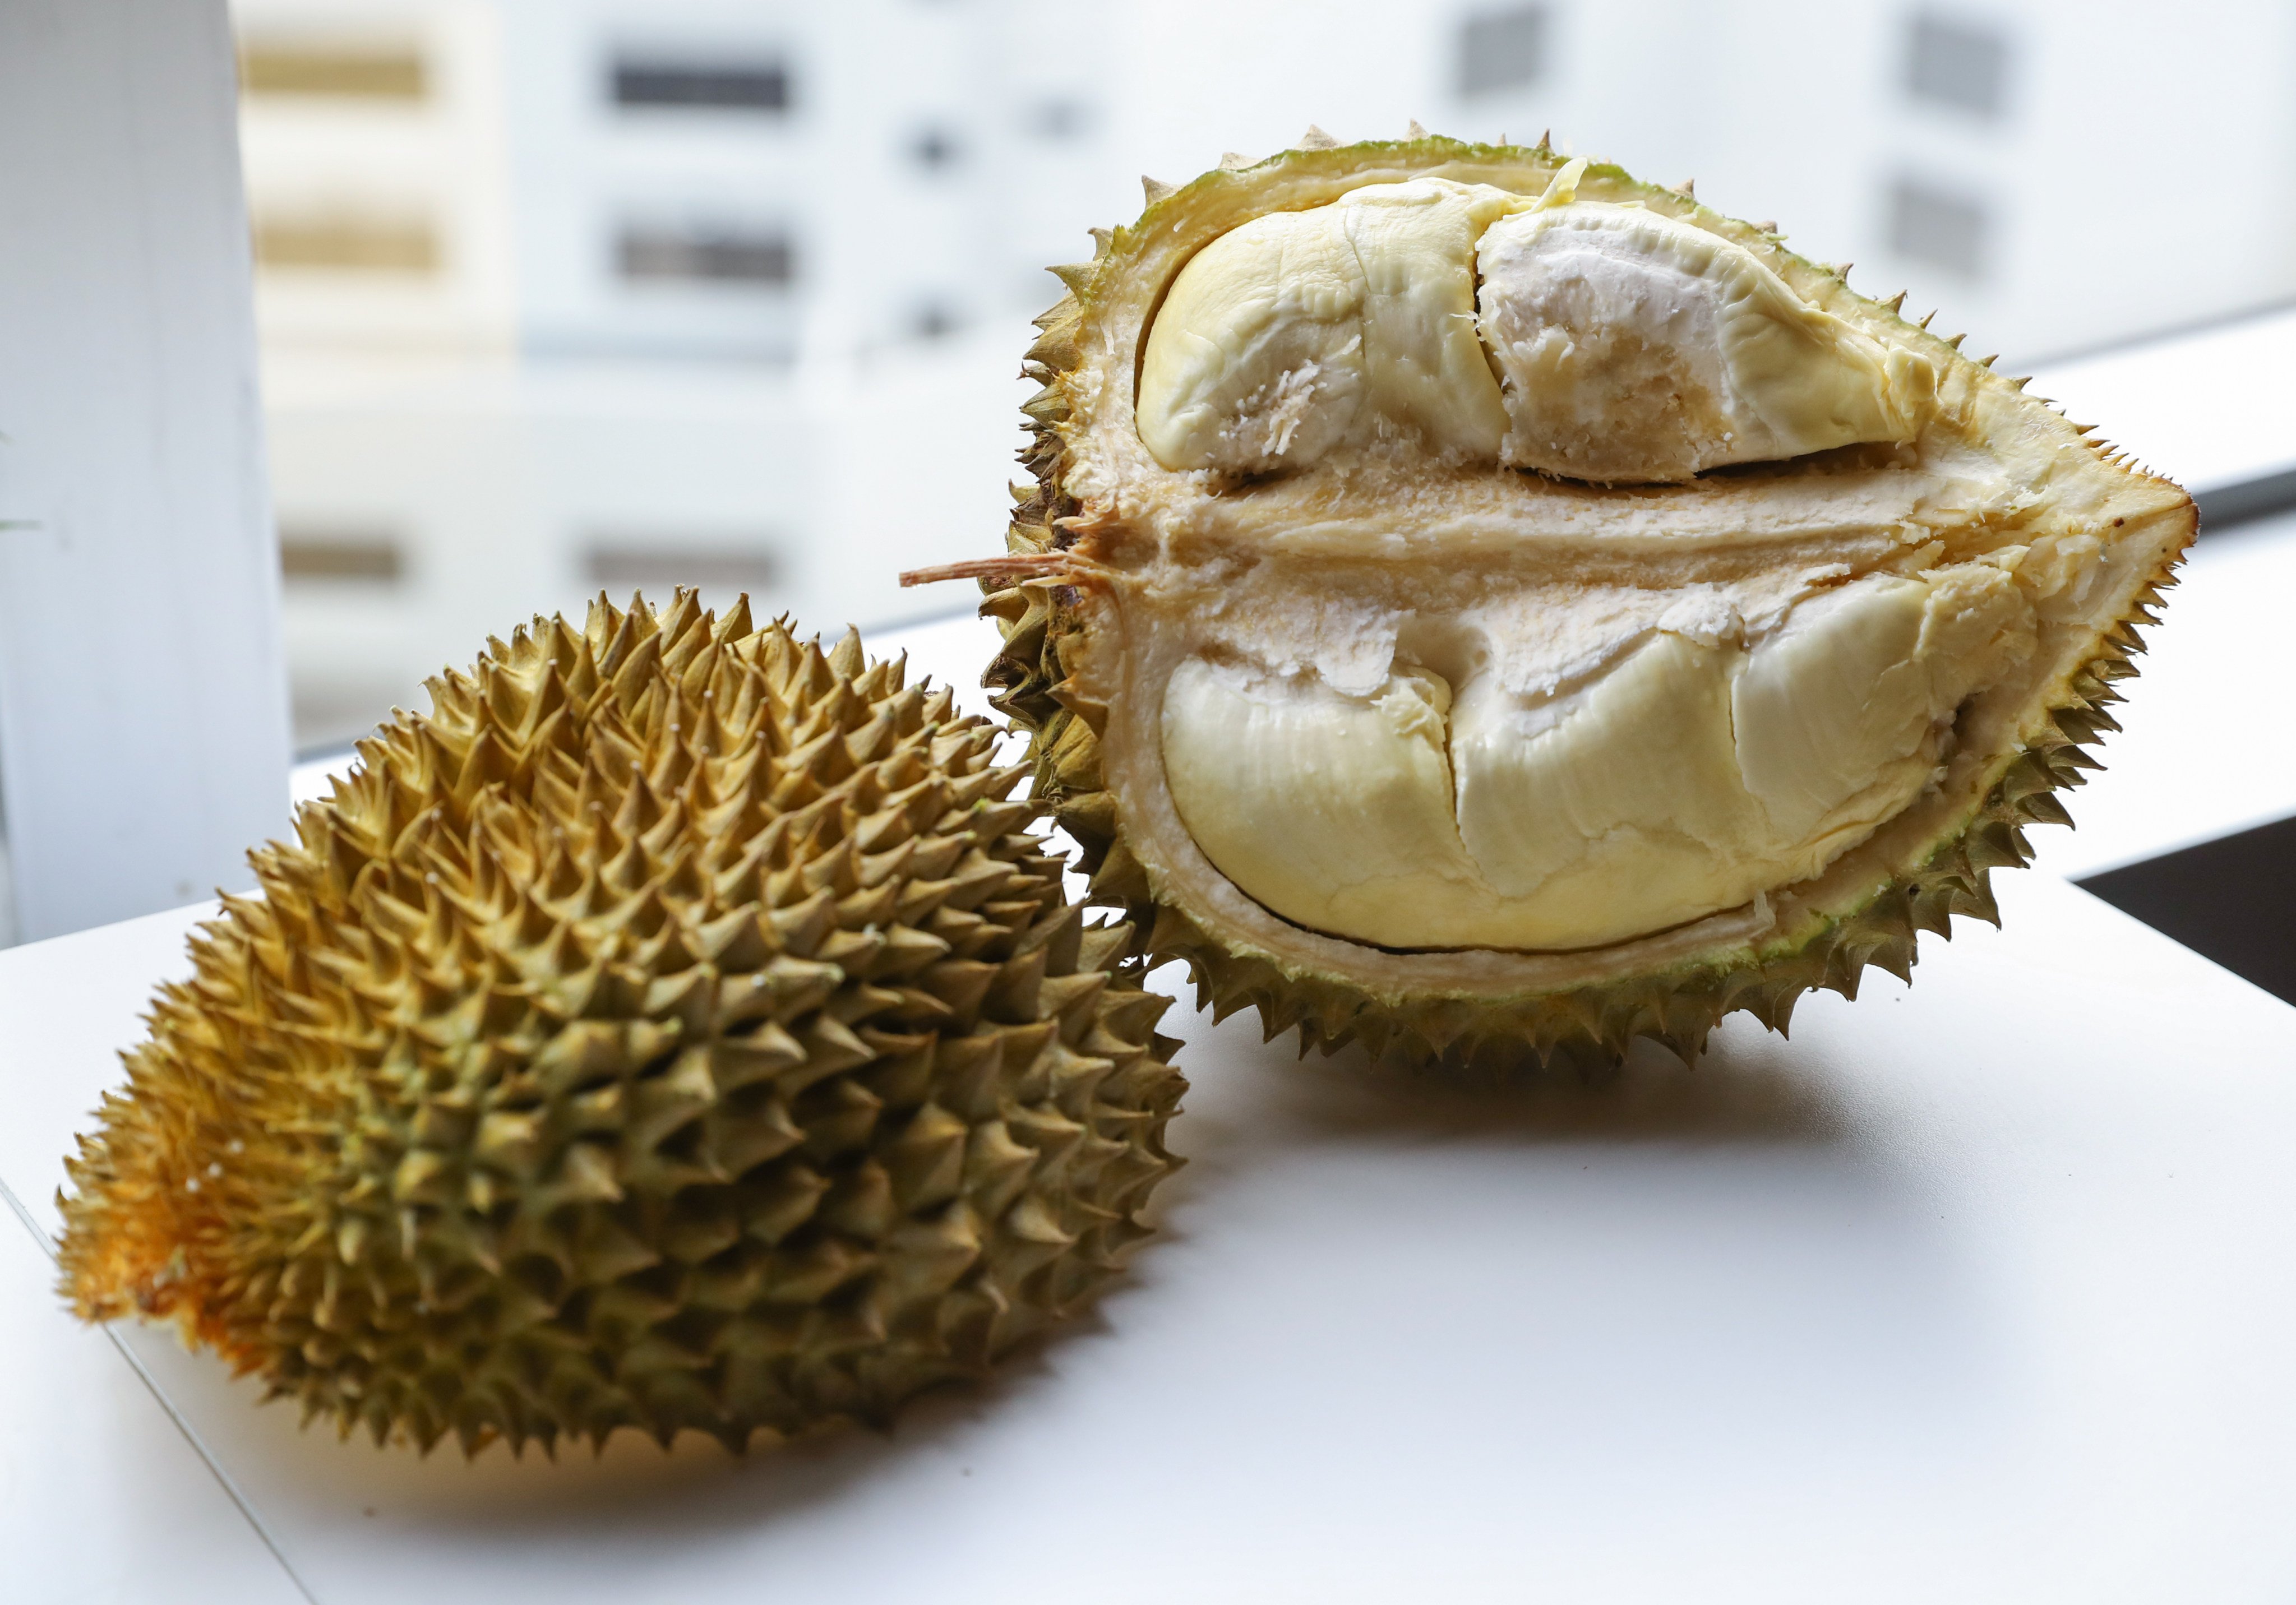 The Post taste-tested Hainan durian in July 2023. Photo: Sun Yeung